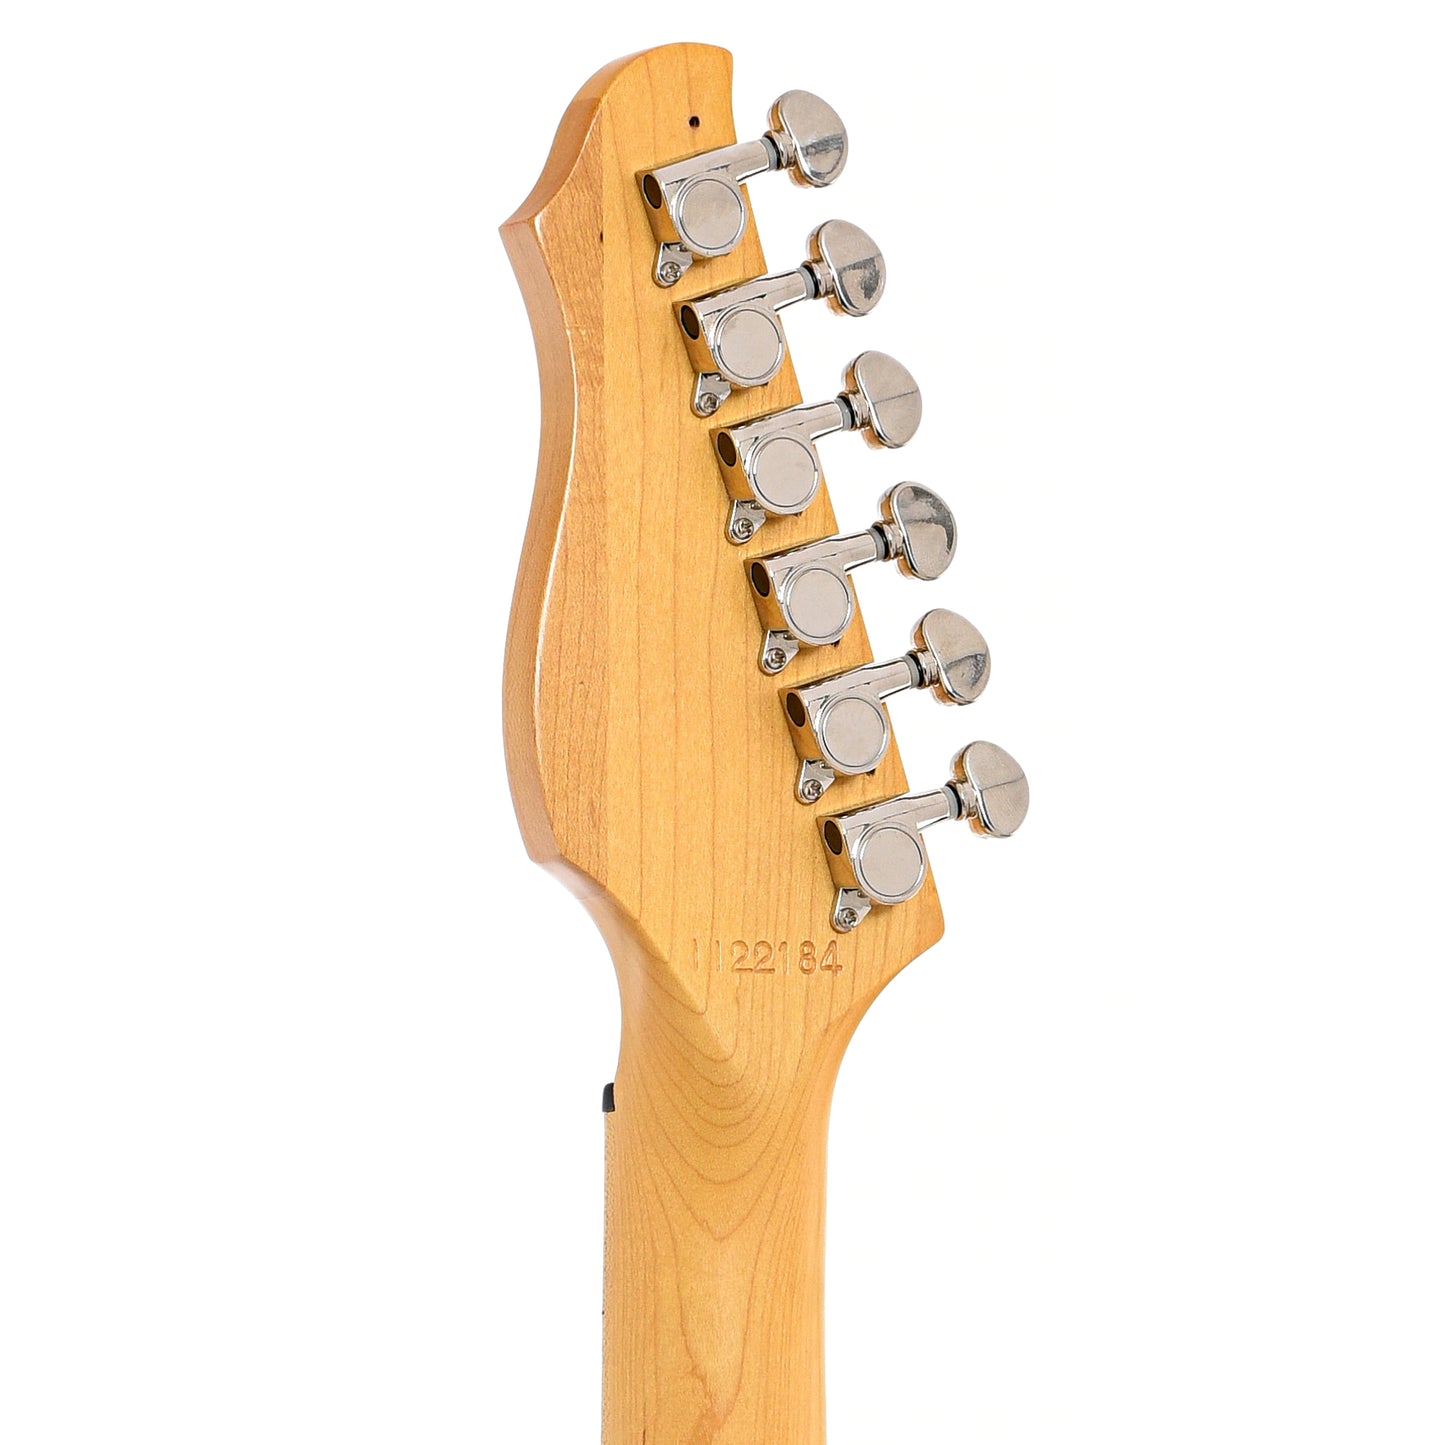 back headstock of Electra X-130 Electricx Guitar (c.1982)